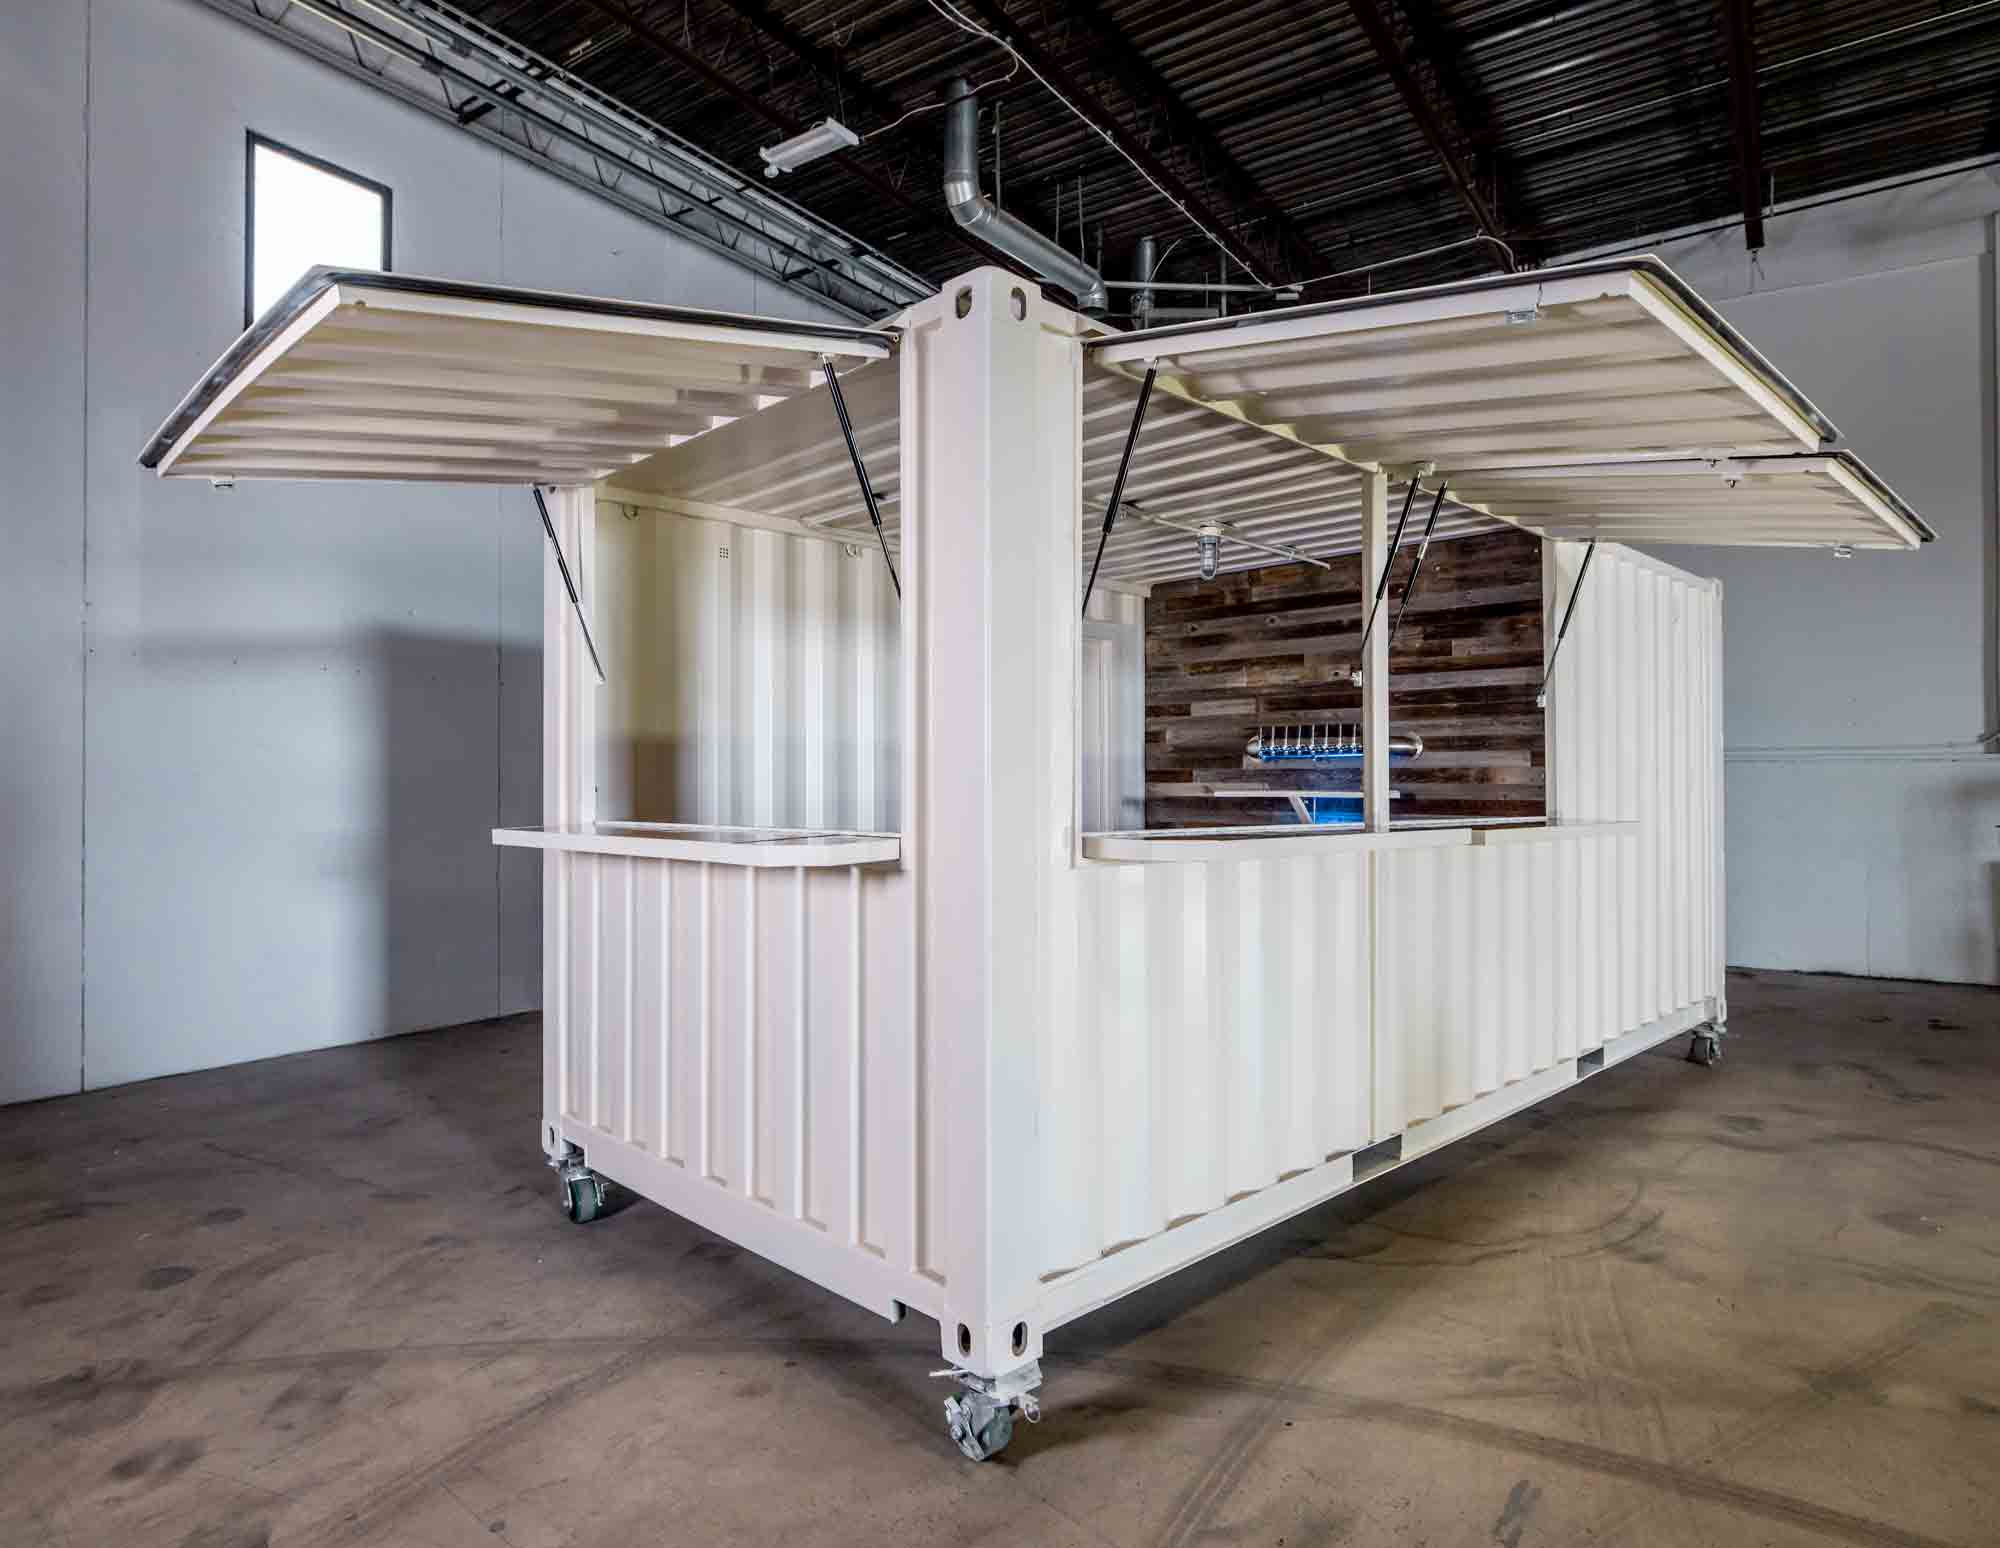 ROXBOX Containers custom shipping container bar with walk-in cooler and tap system built for Smuttynose Brewing Co.